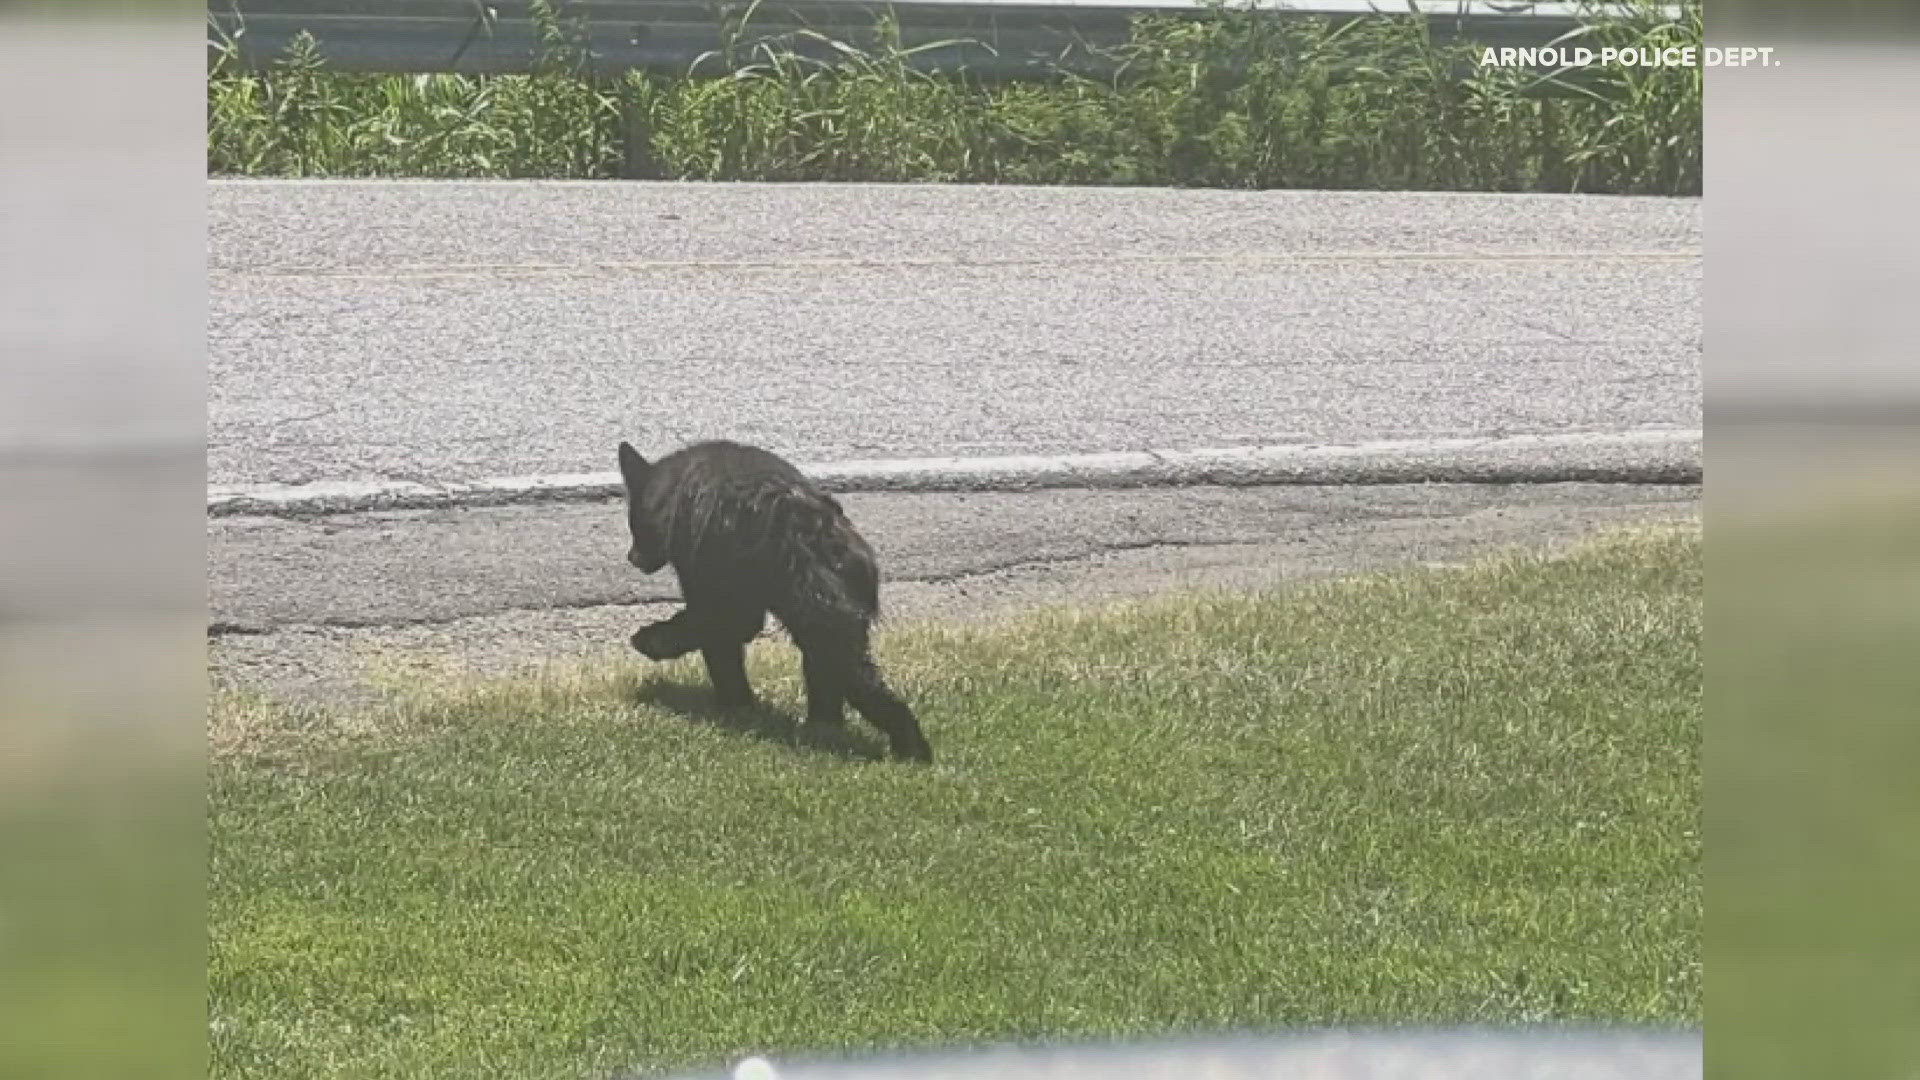 Video of the bear was sent to 5 On Your Side from Pat Austin. This bear has been tracked around the St. Louis County area.